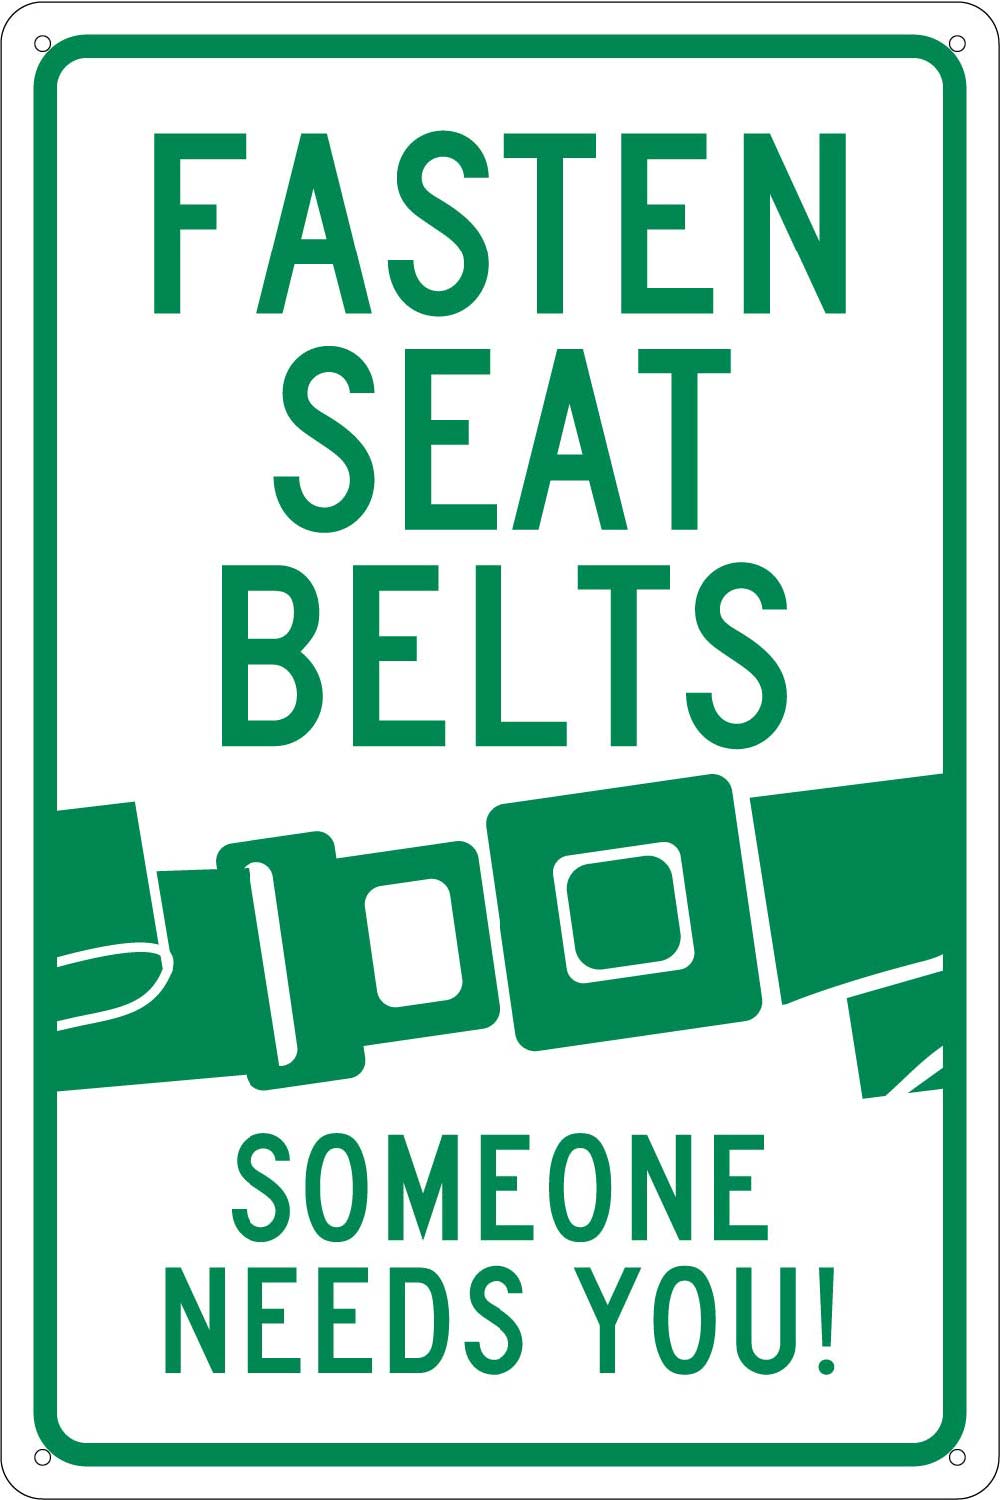 Fasten Seat Belts Someone Needs You Sign-eSafety Supplies, Inc